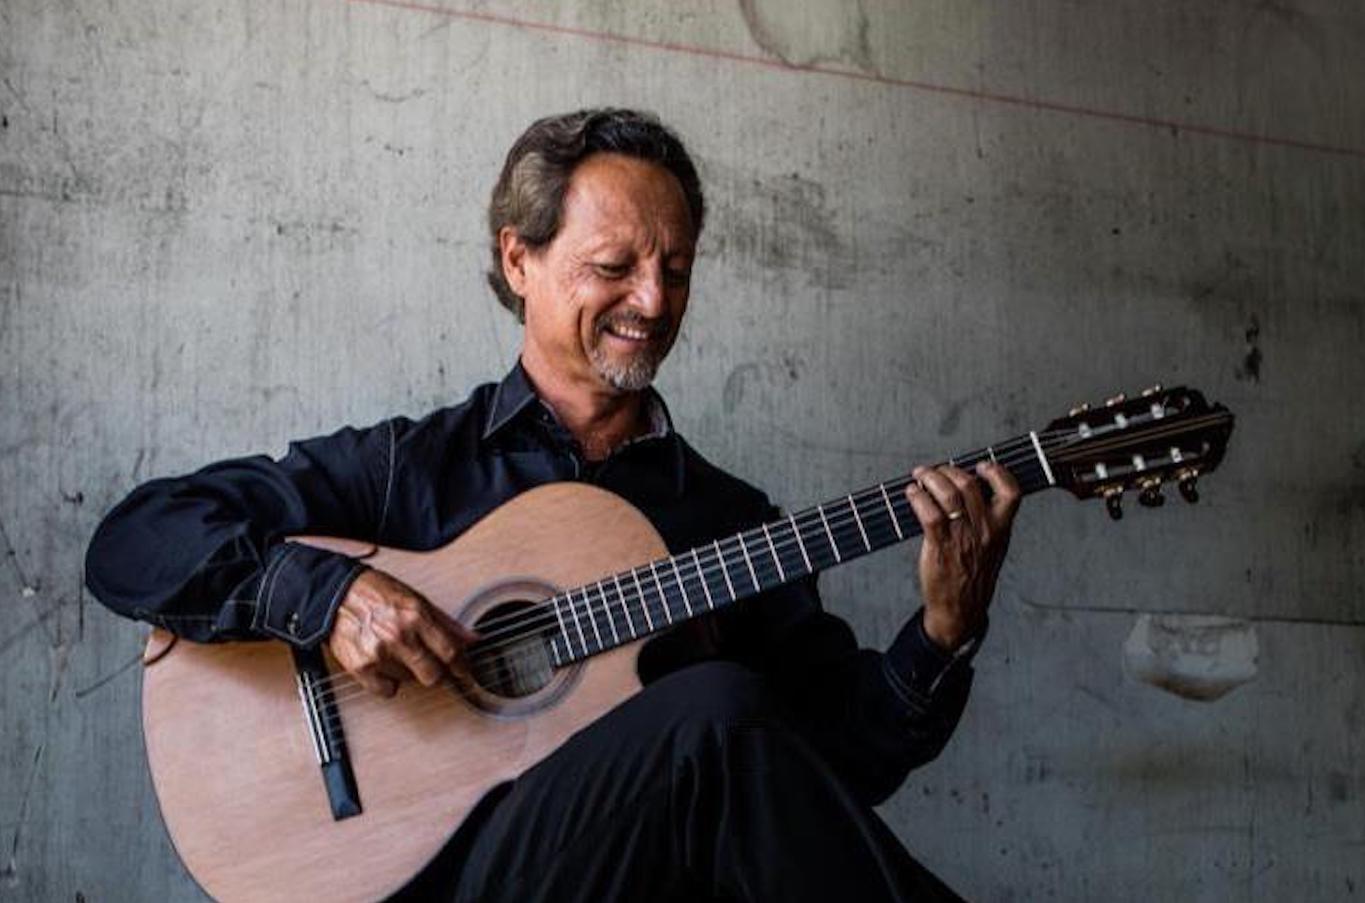 Instructor, Fred Benedetti with his classical guitar